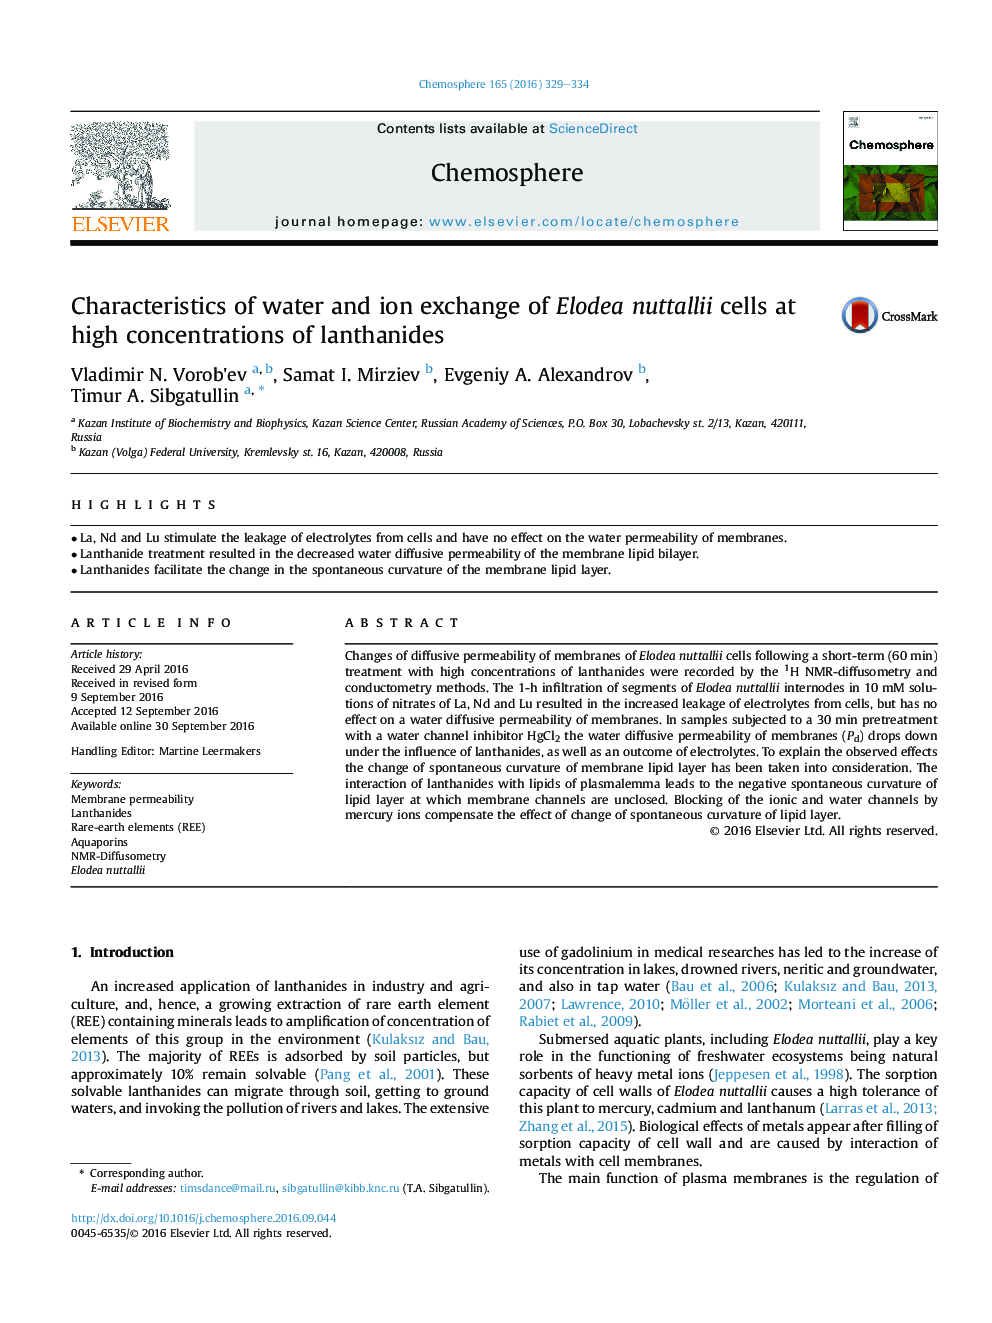 Characteristics of water and ion exchange of Elodea nuttallii cells at high concentrations of lanthanides